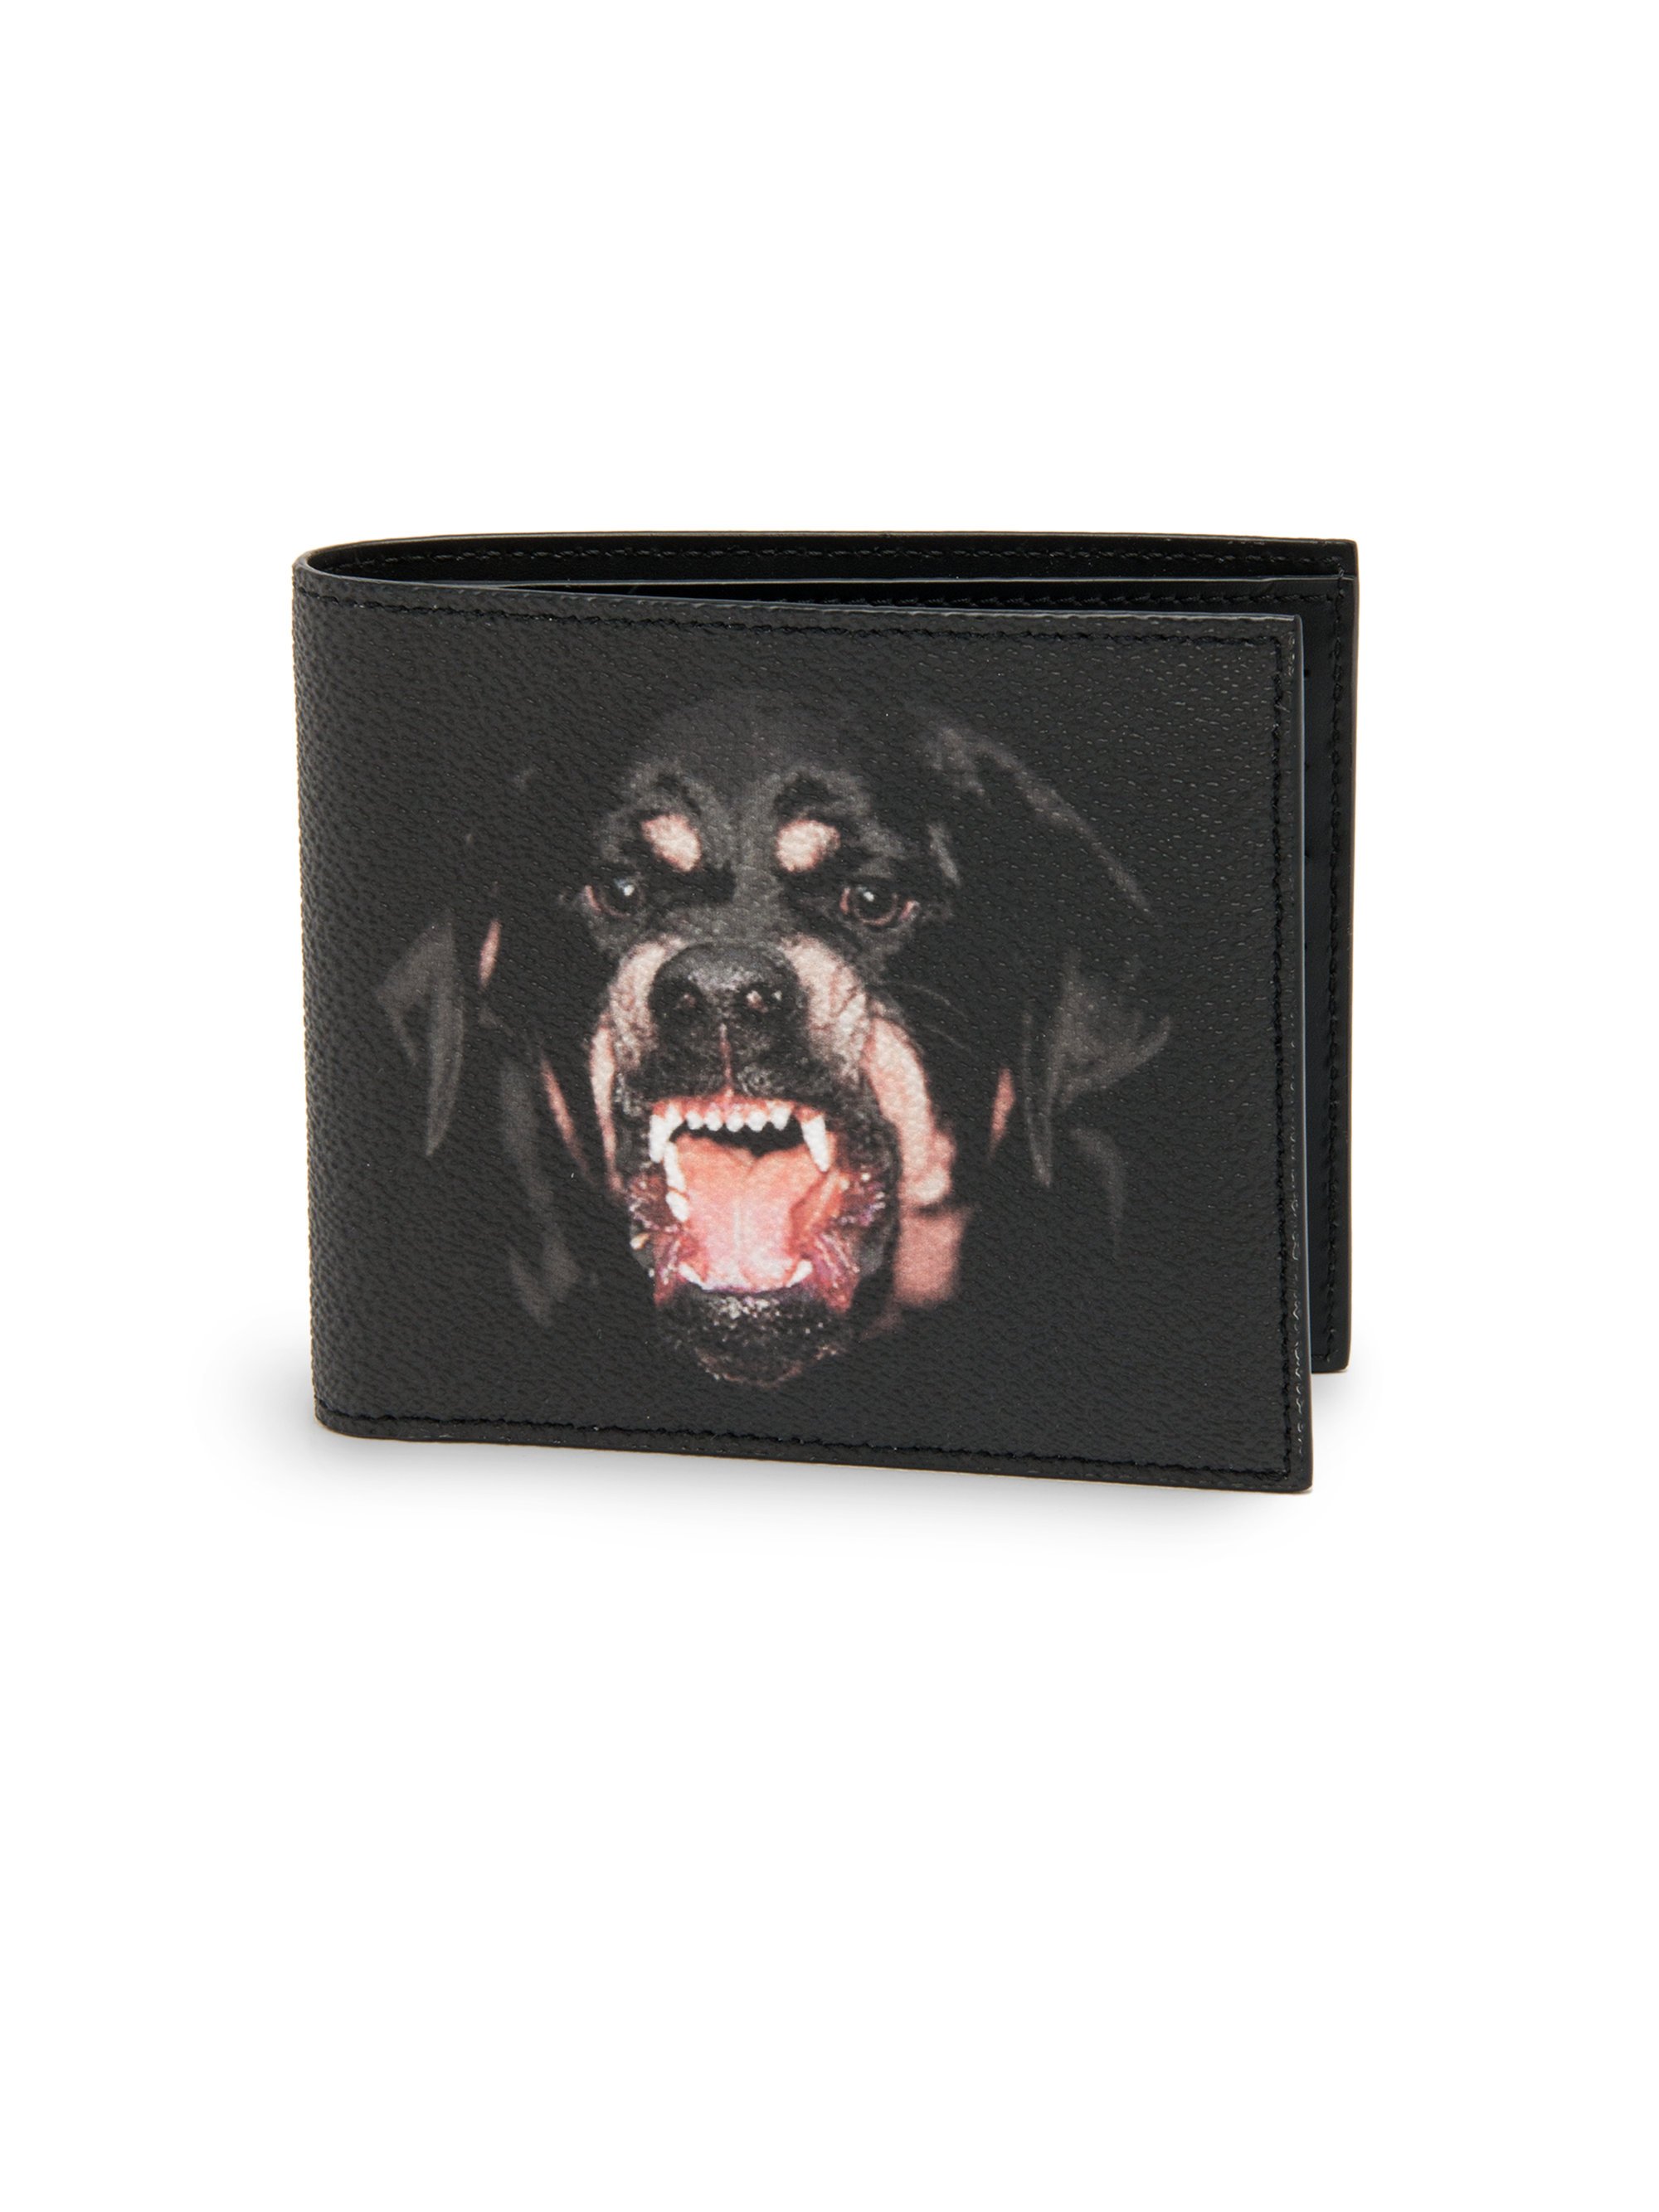 Lyst - Givenchy Rottweiler Leather Wallet in Black for Men